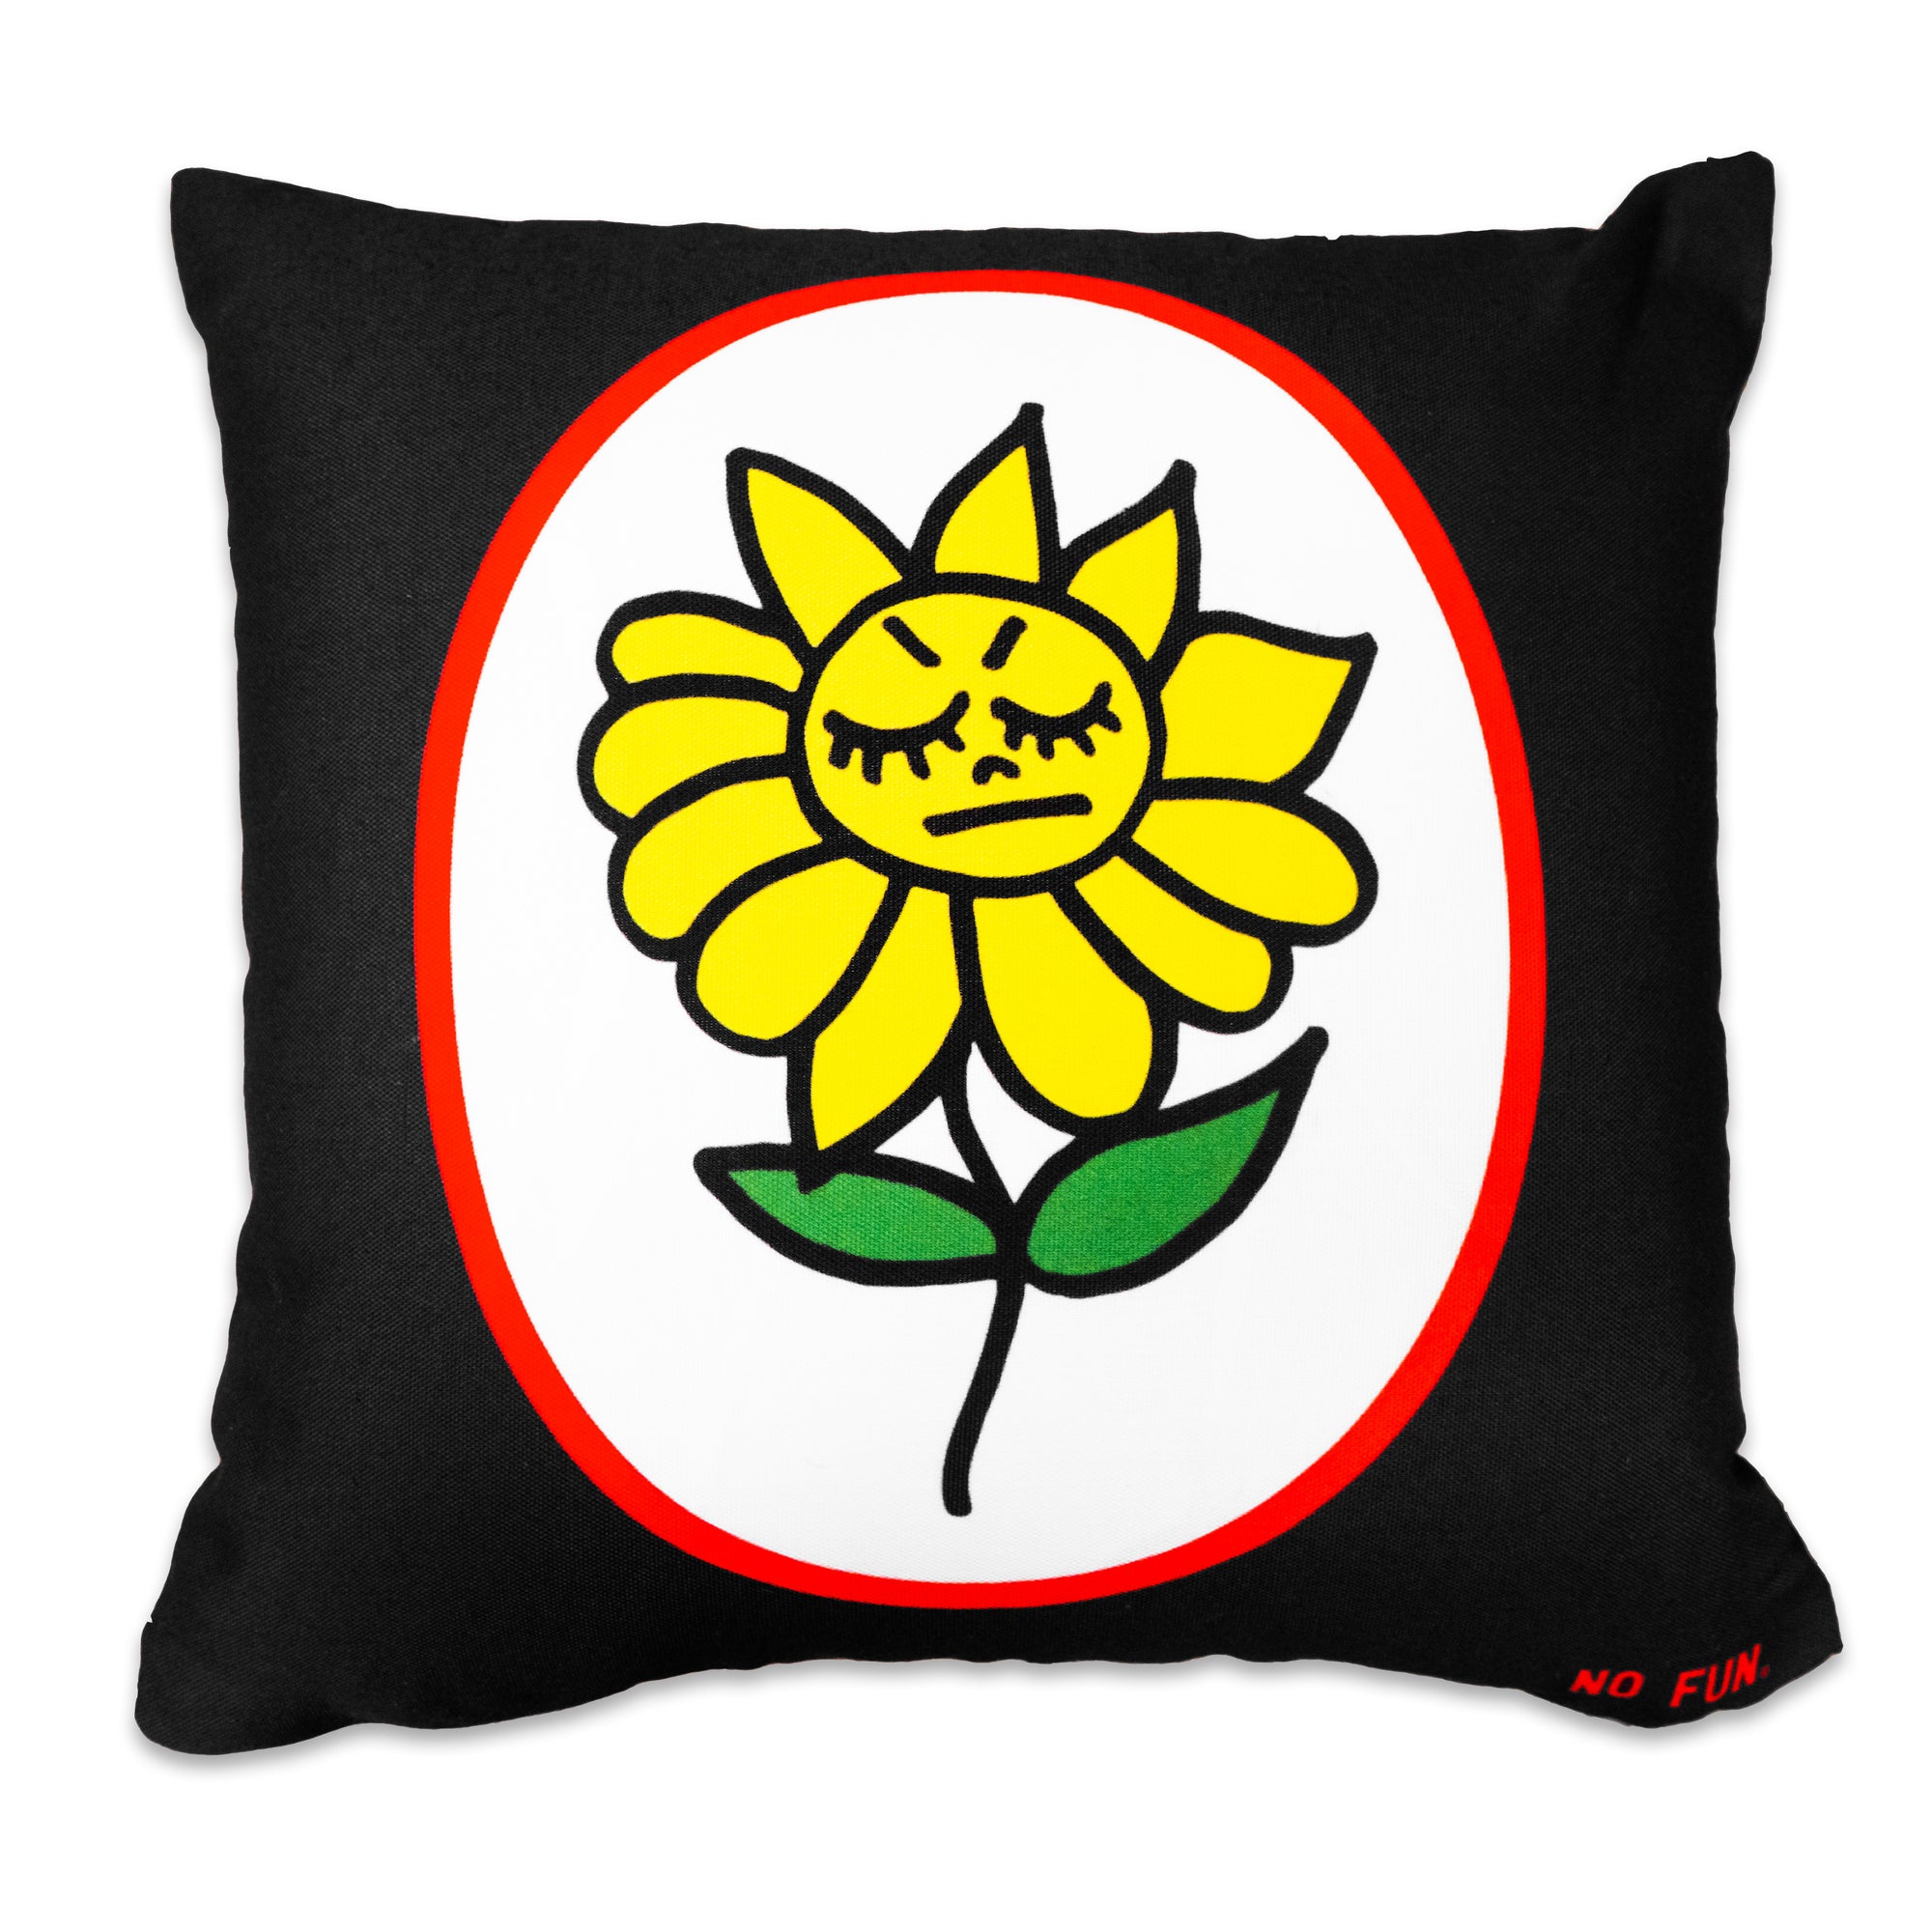 The "Angry Flower & Butterfly" Pillow by No Fun®.  Pillow is black, with a double sided design. This side has a red and white oval, with a yellow cartoon flower in the center.  The flower has an angry expression, and two green leaves.  There is a small, red, "No Fun®" logo in the bottom right hand corner of the pillow.